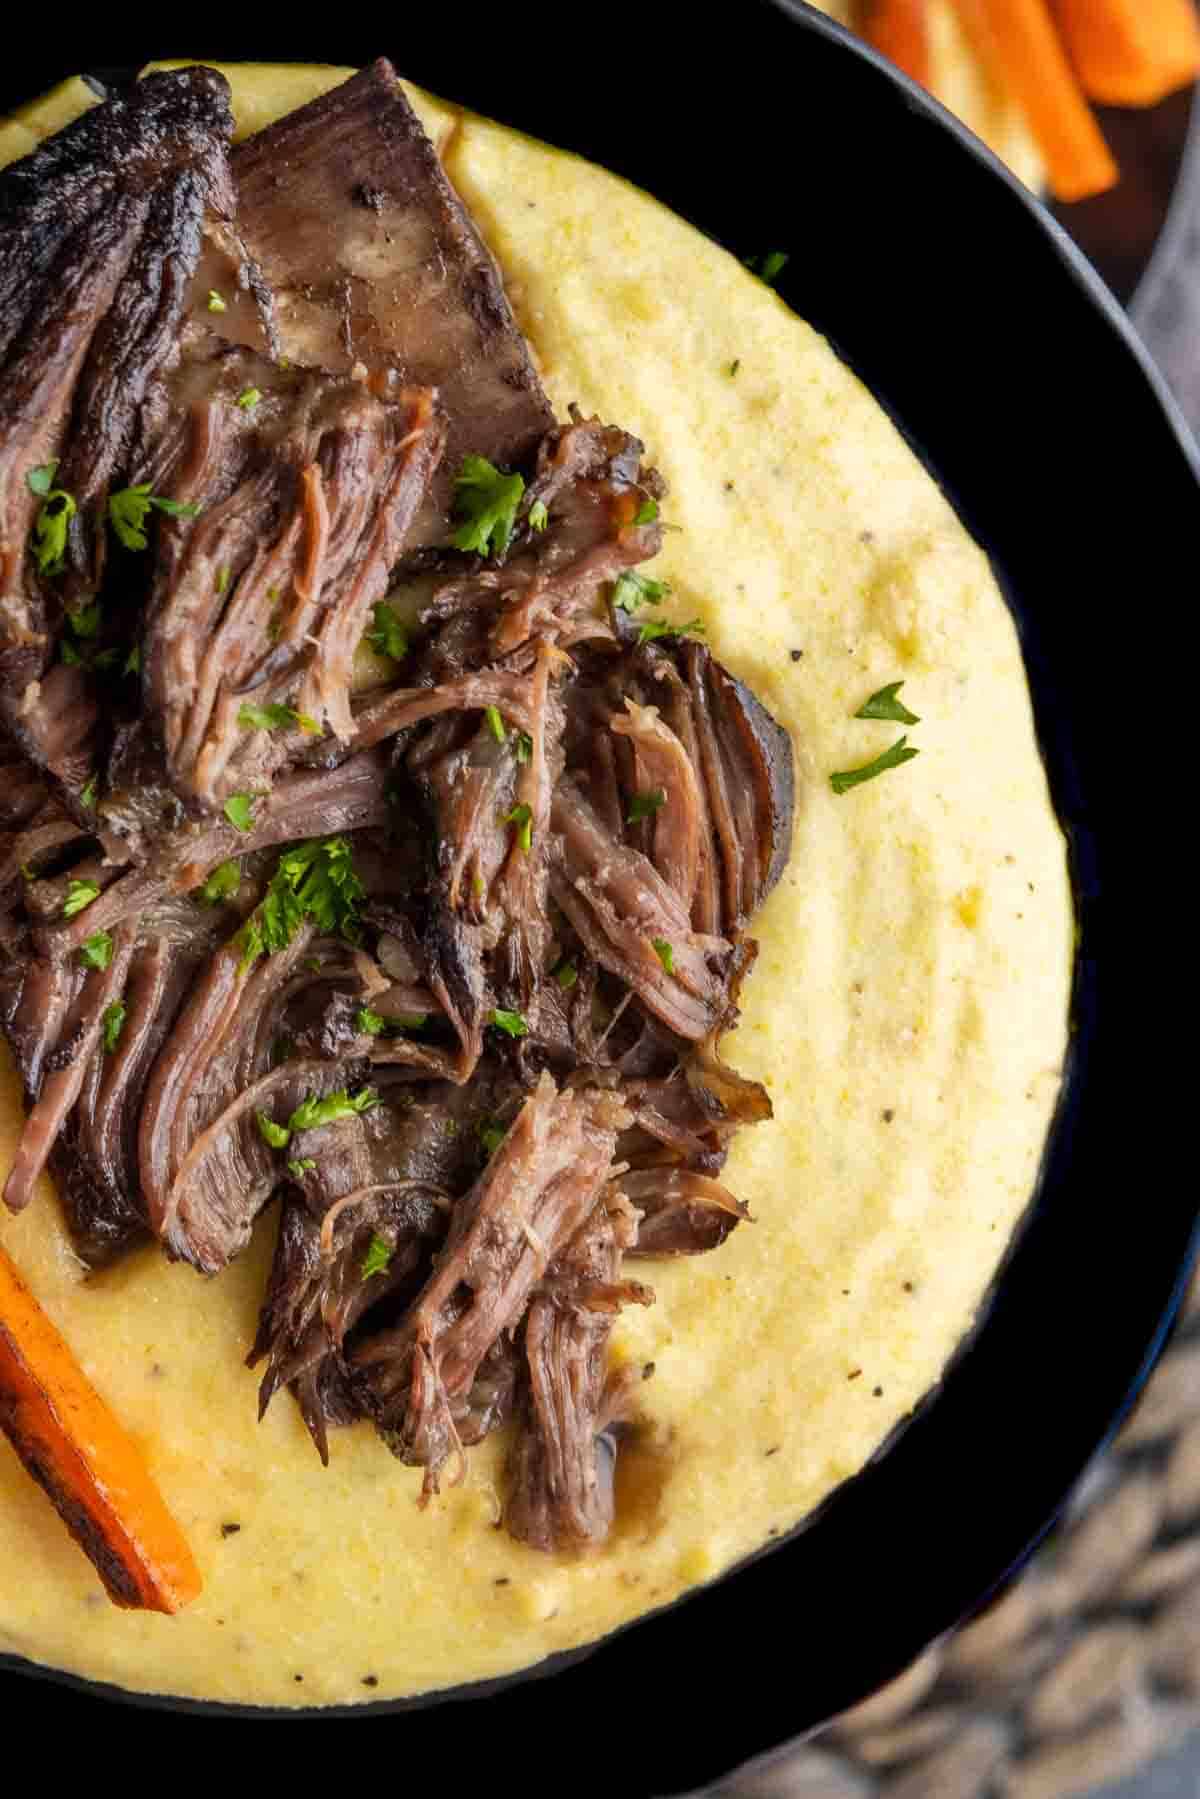 holding a plate of Creamy Polenta and braised ribs